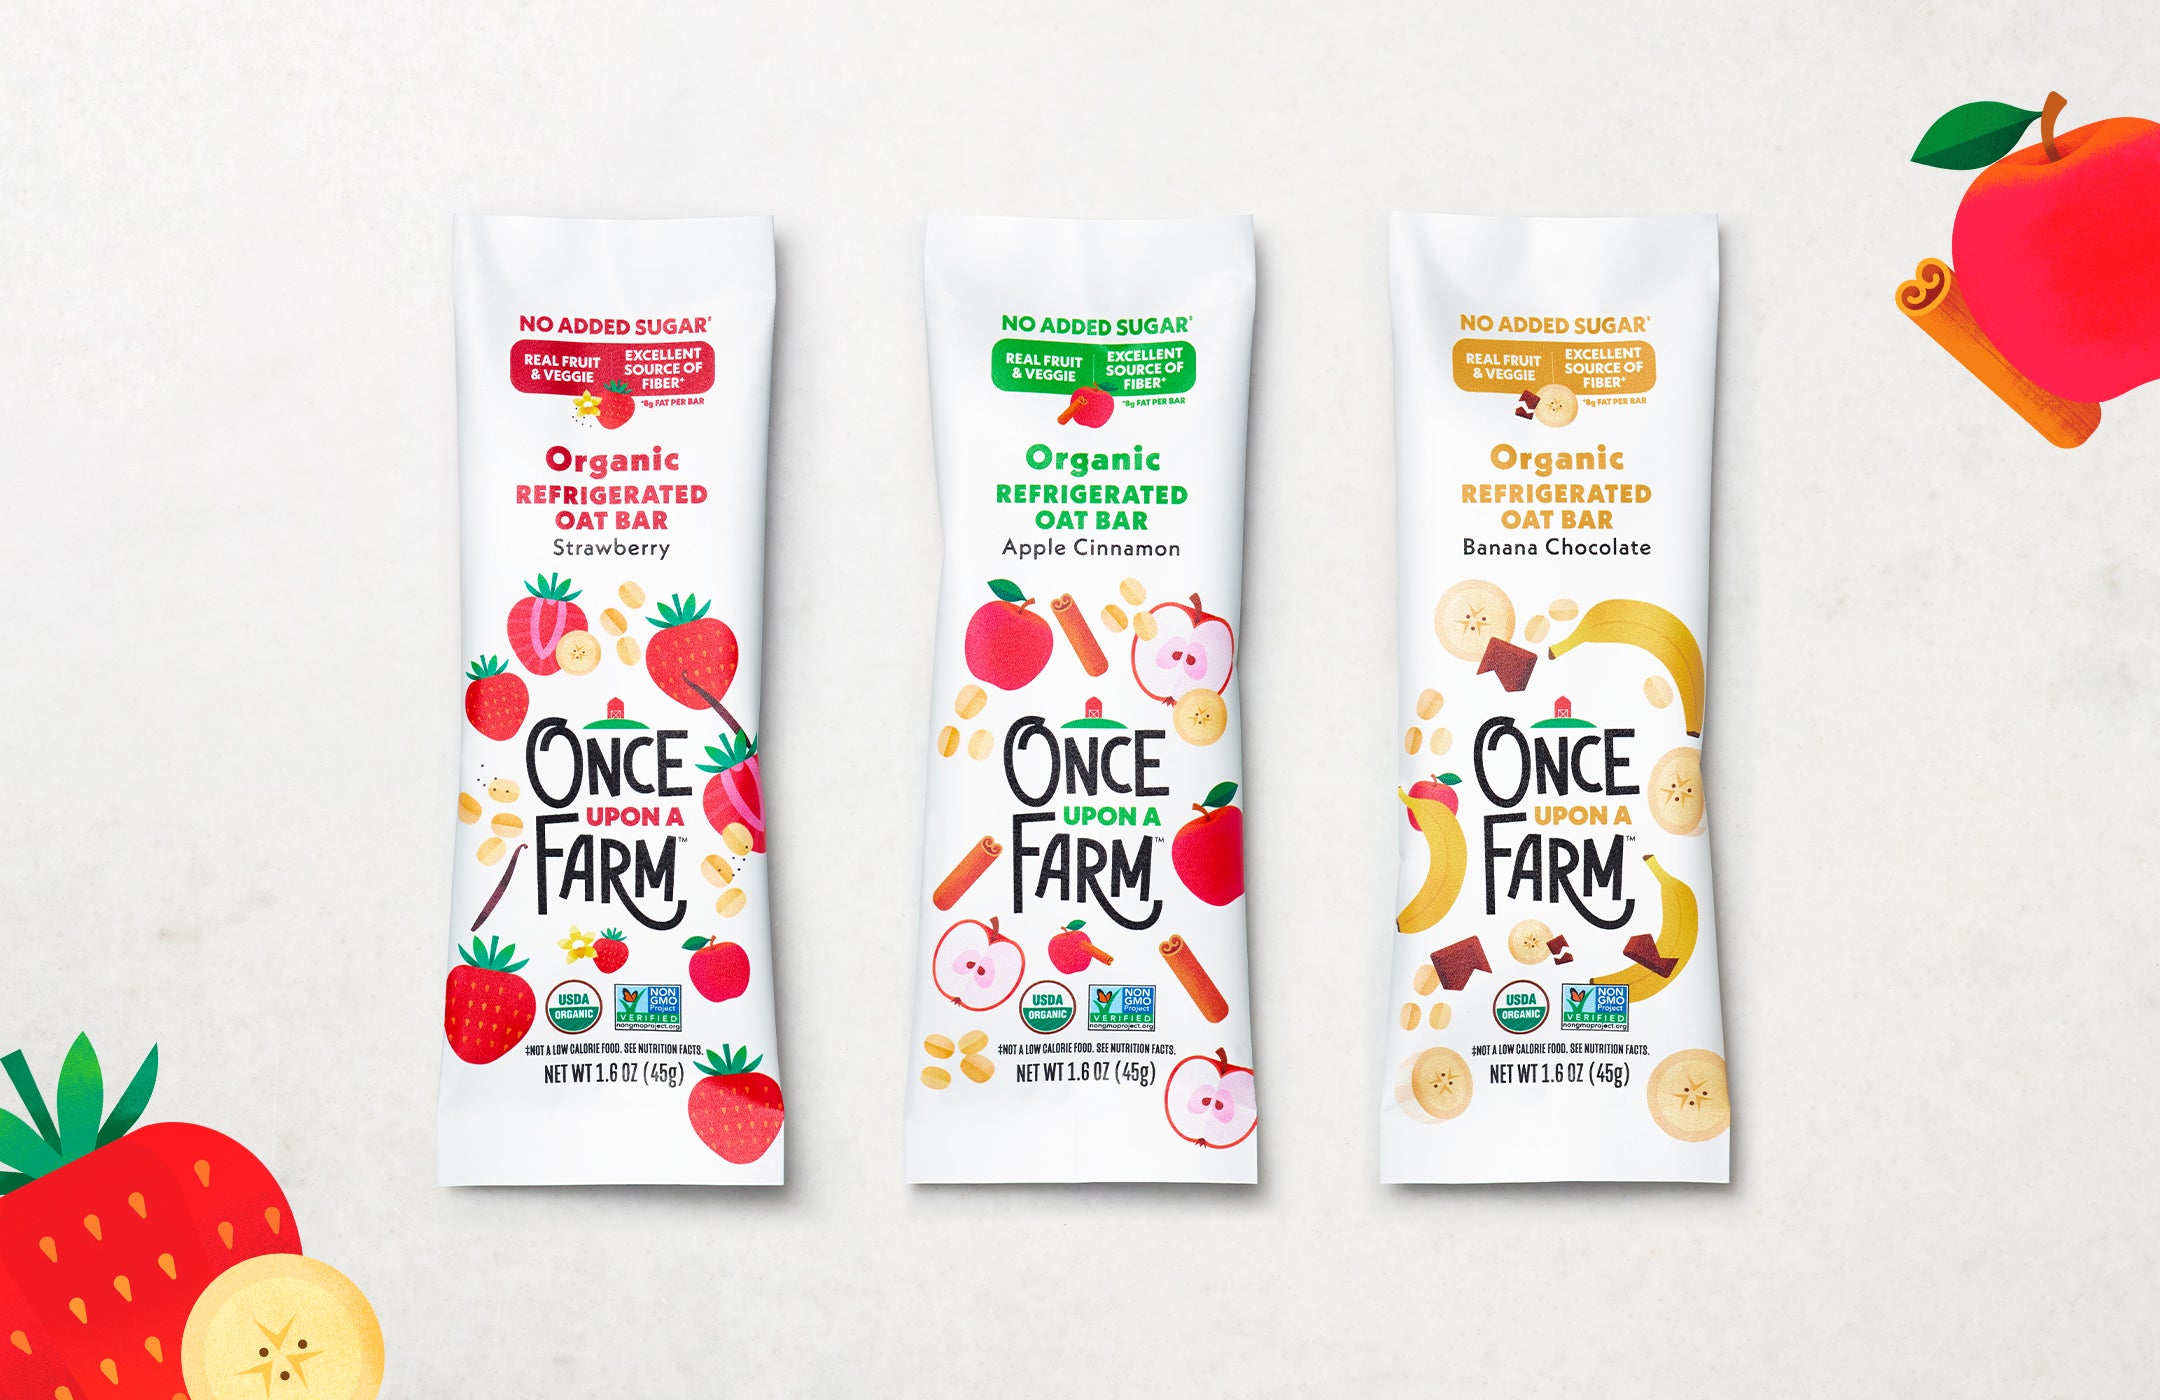 Introducing Our NEW Refrigerated Oat Bars